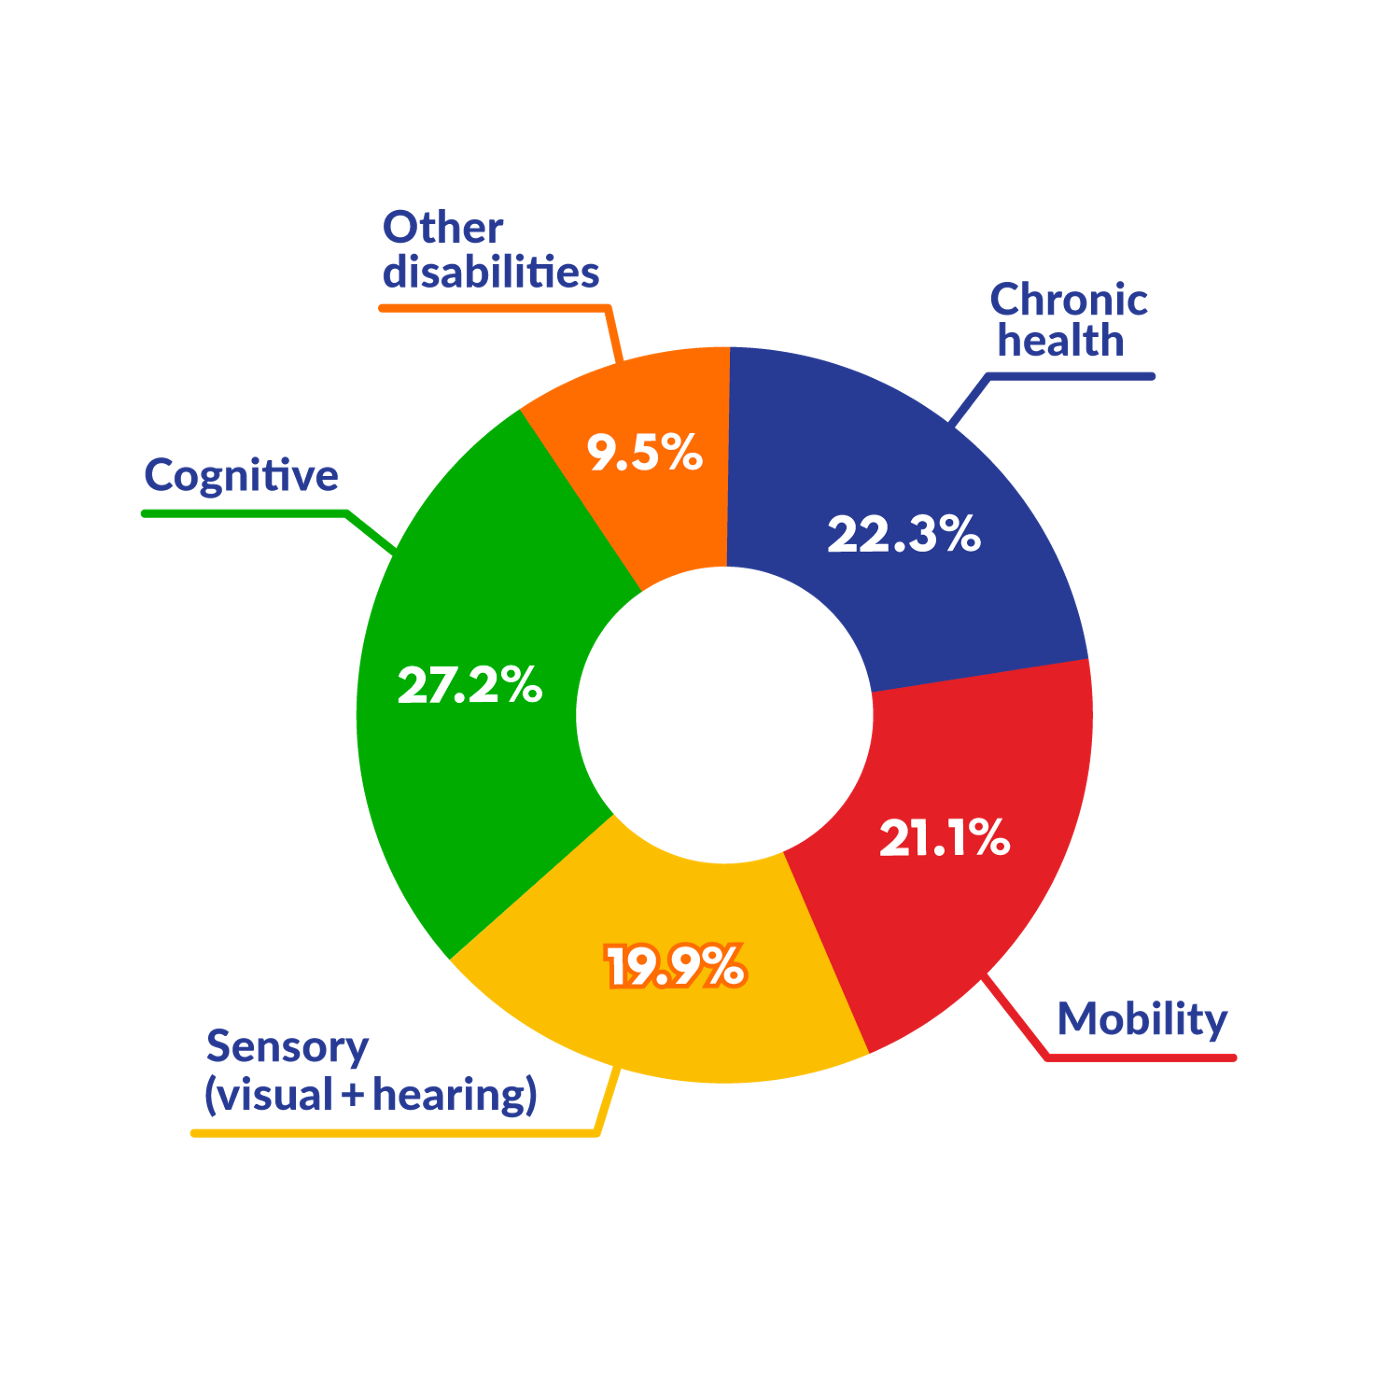 Pie chart showing percentages of sampled physicians disability prevalence. Cognitive 27.2%, Chronic health 22.3%, Mobility 21.1%, Sensory (visual and hearing) 19.9% and Other disabilities 9.5%